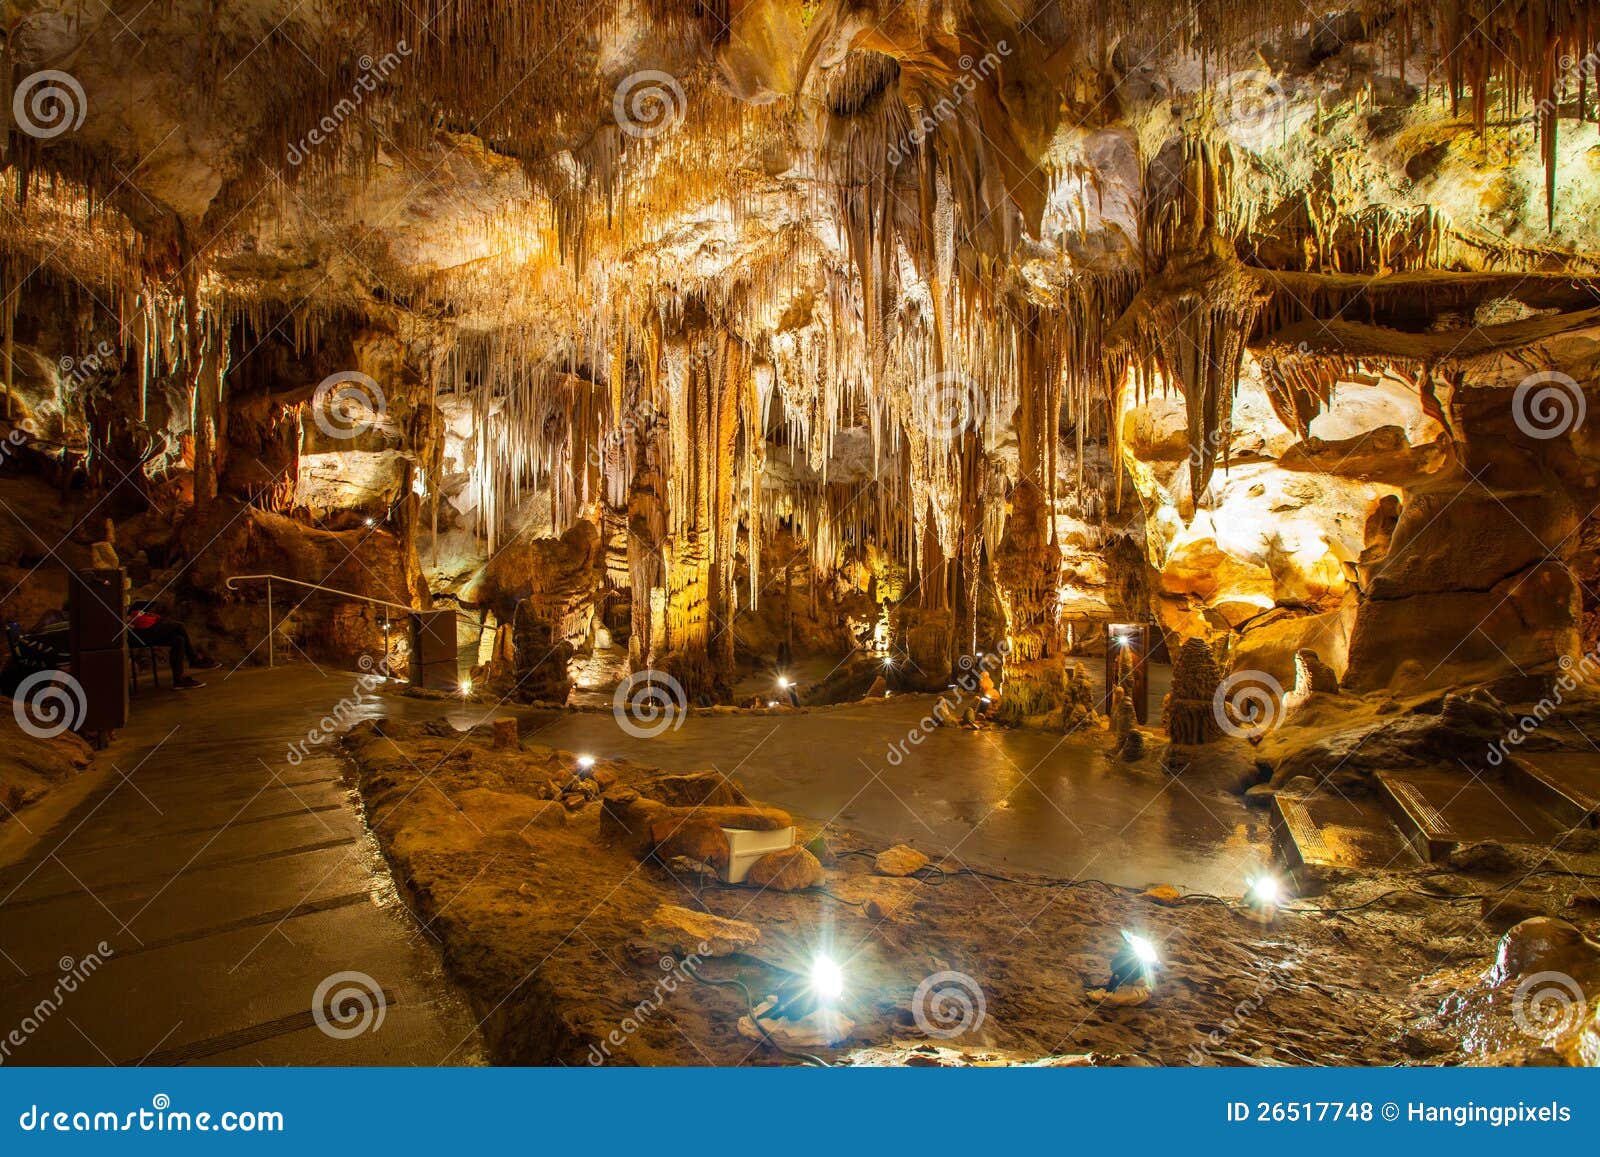 stalactite and stalagmite formations in the cave